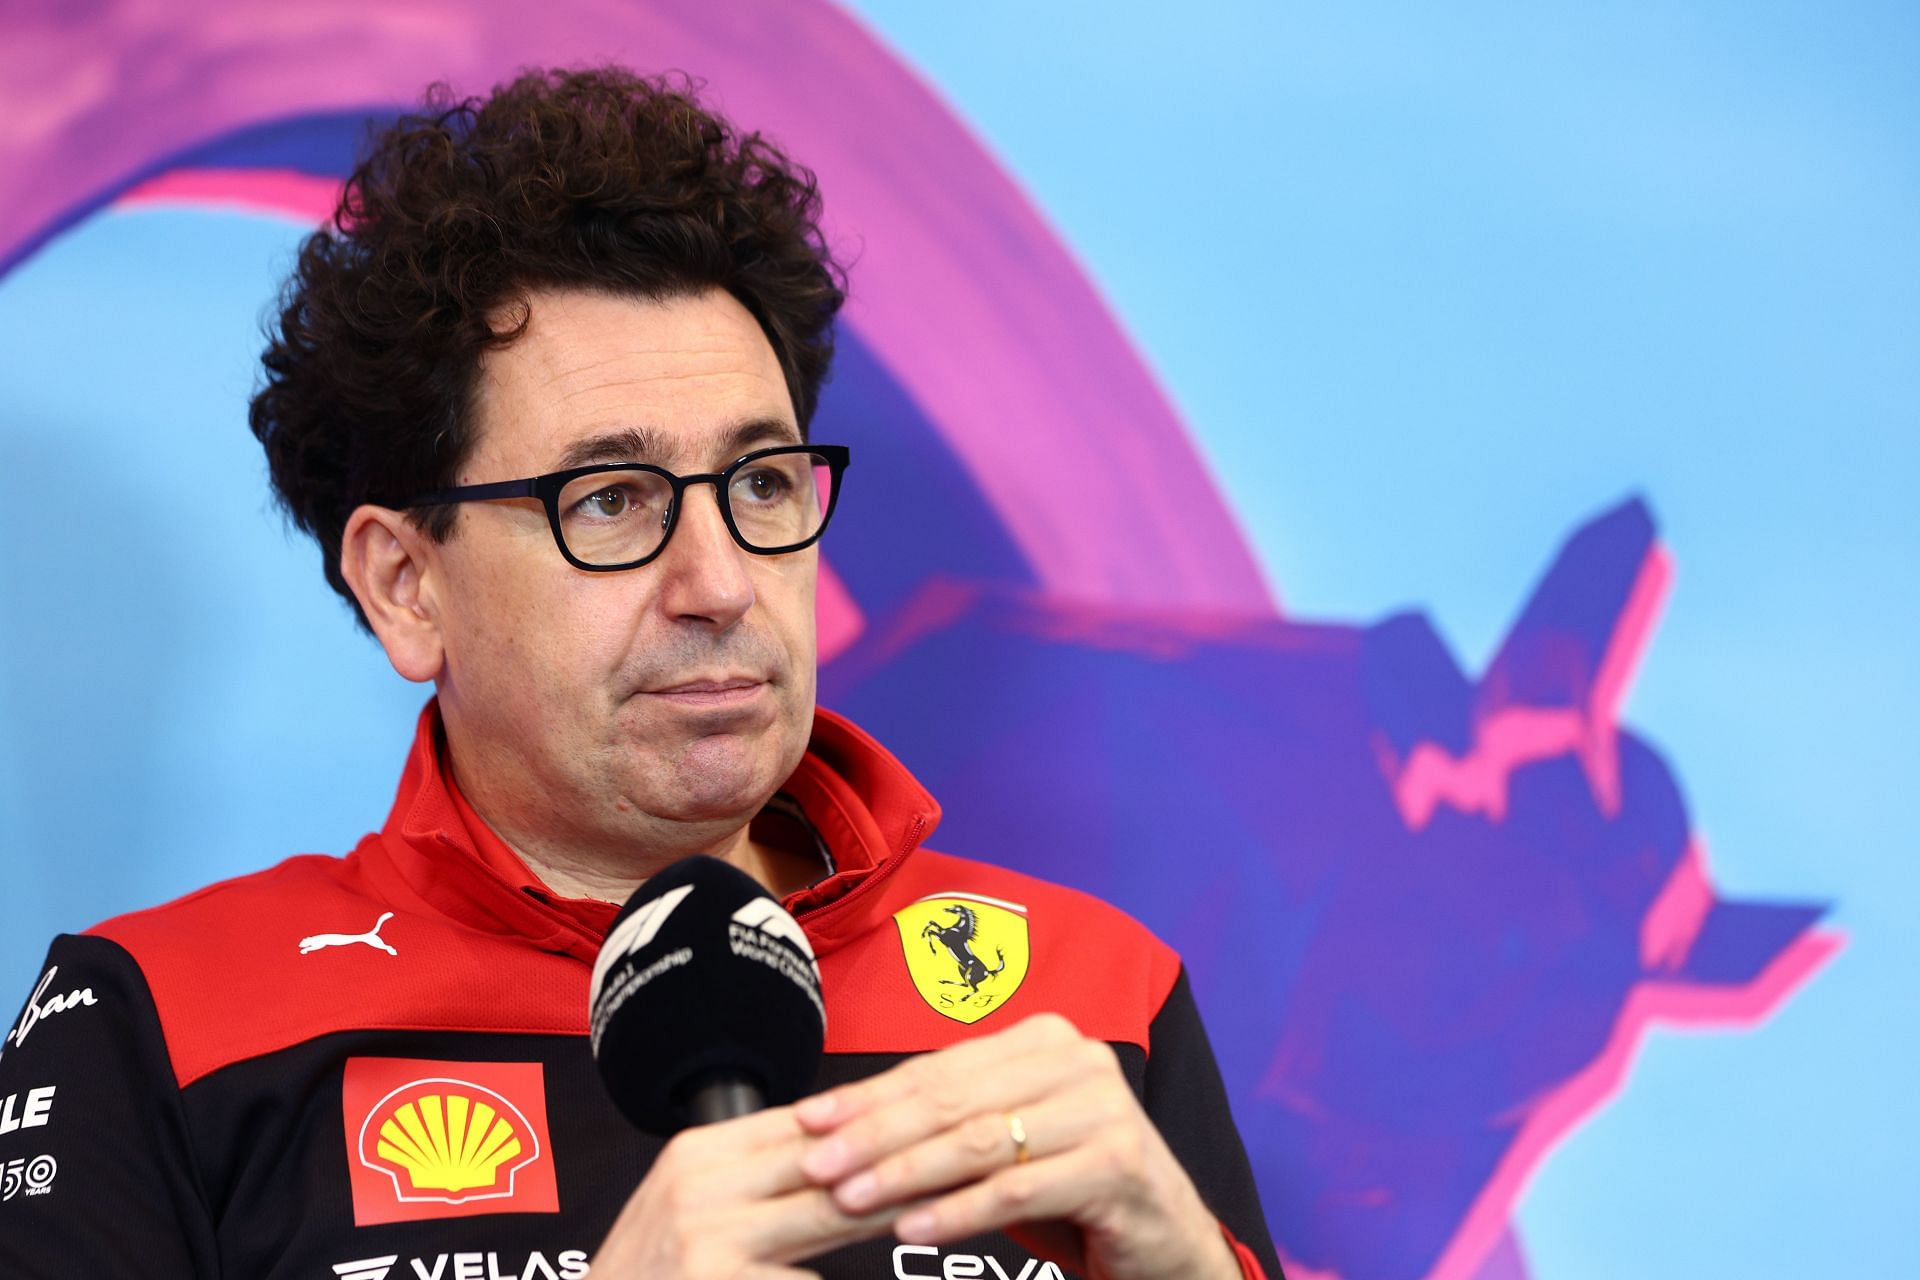 Ferrari team principal Mattia Binotto speaks to the media during the 2022 F1 Hungarian GP weekend (Photo by Clive Rose/Getty Images)